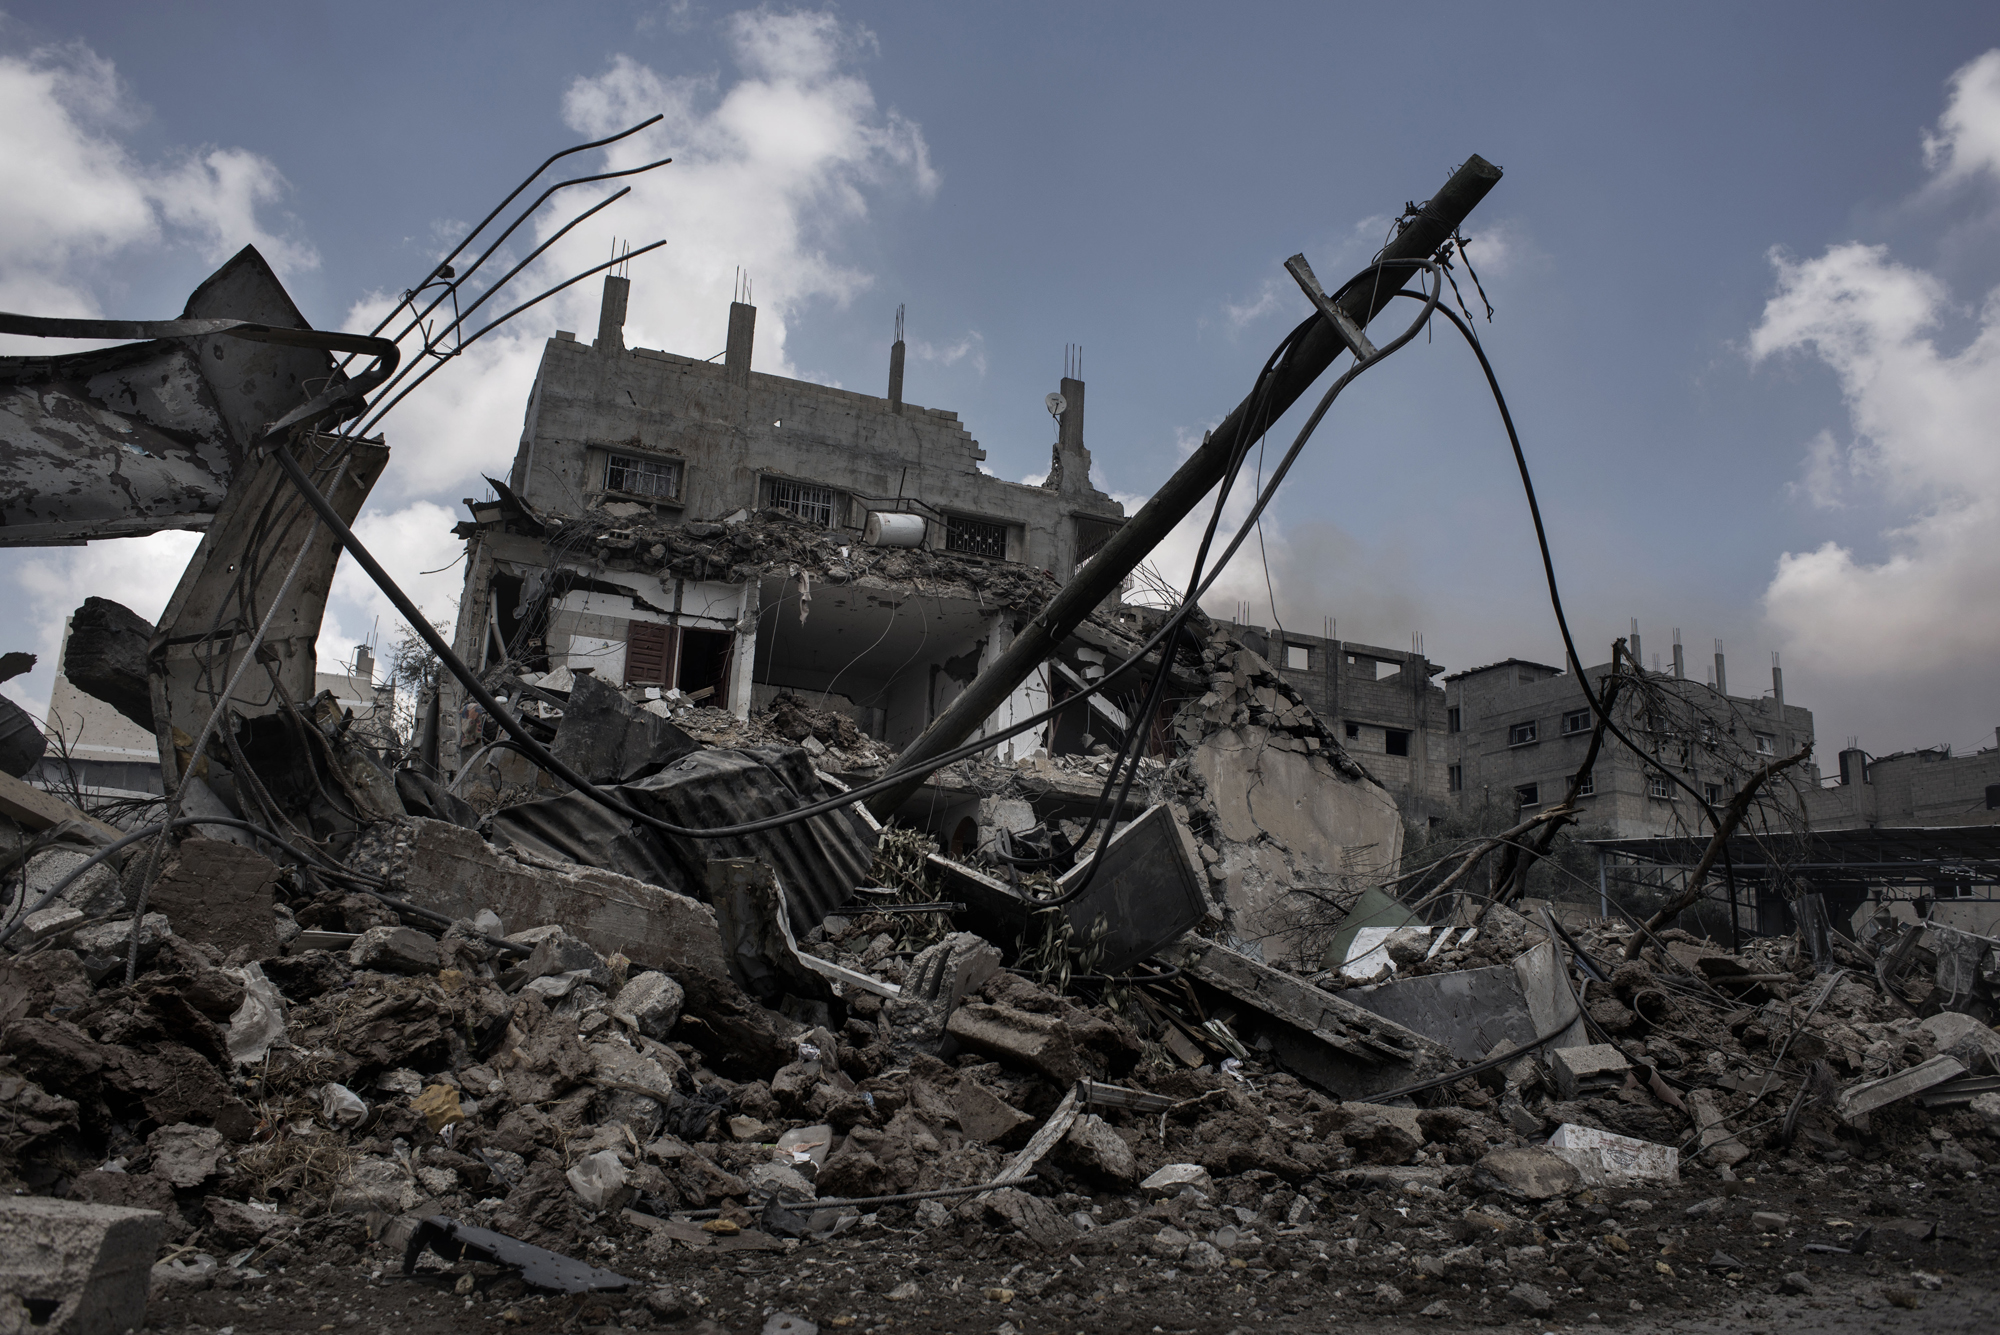 A damaged house in Shujaya district in Gaza, seen during a humanitarian cease-fire, July 20, 2014.